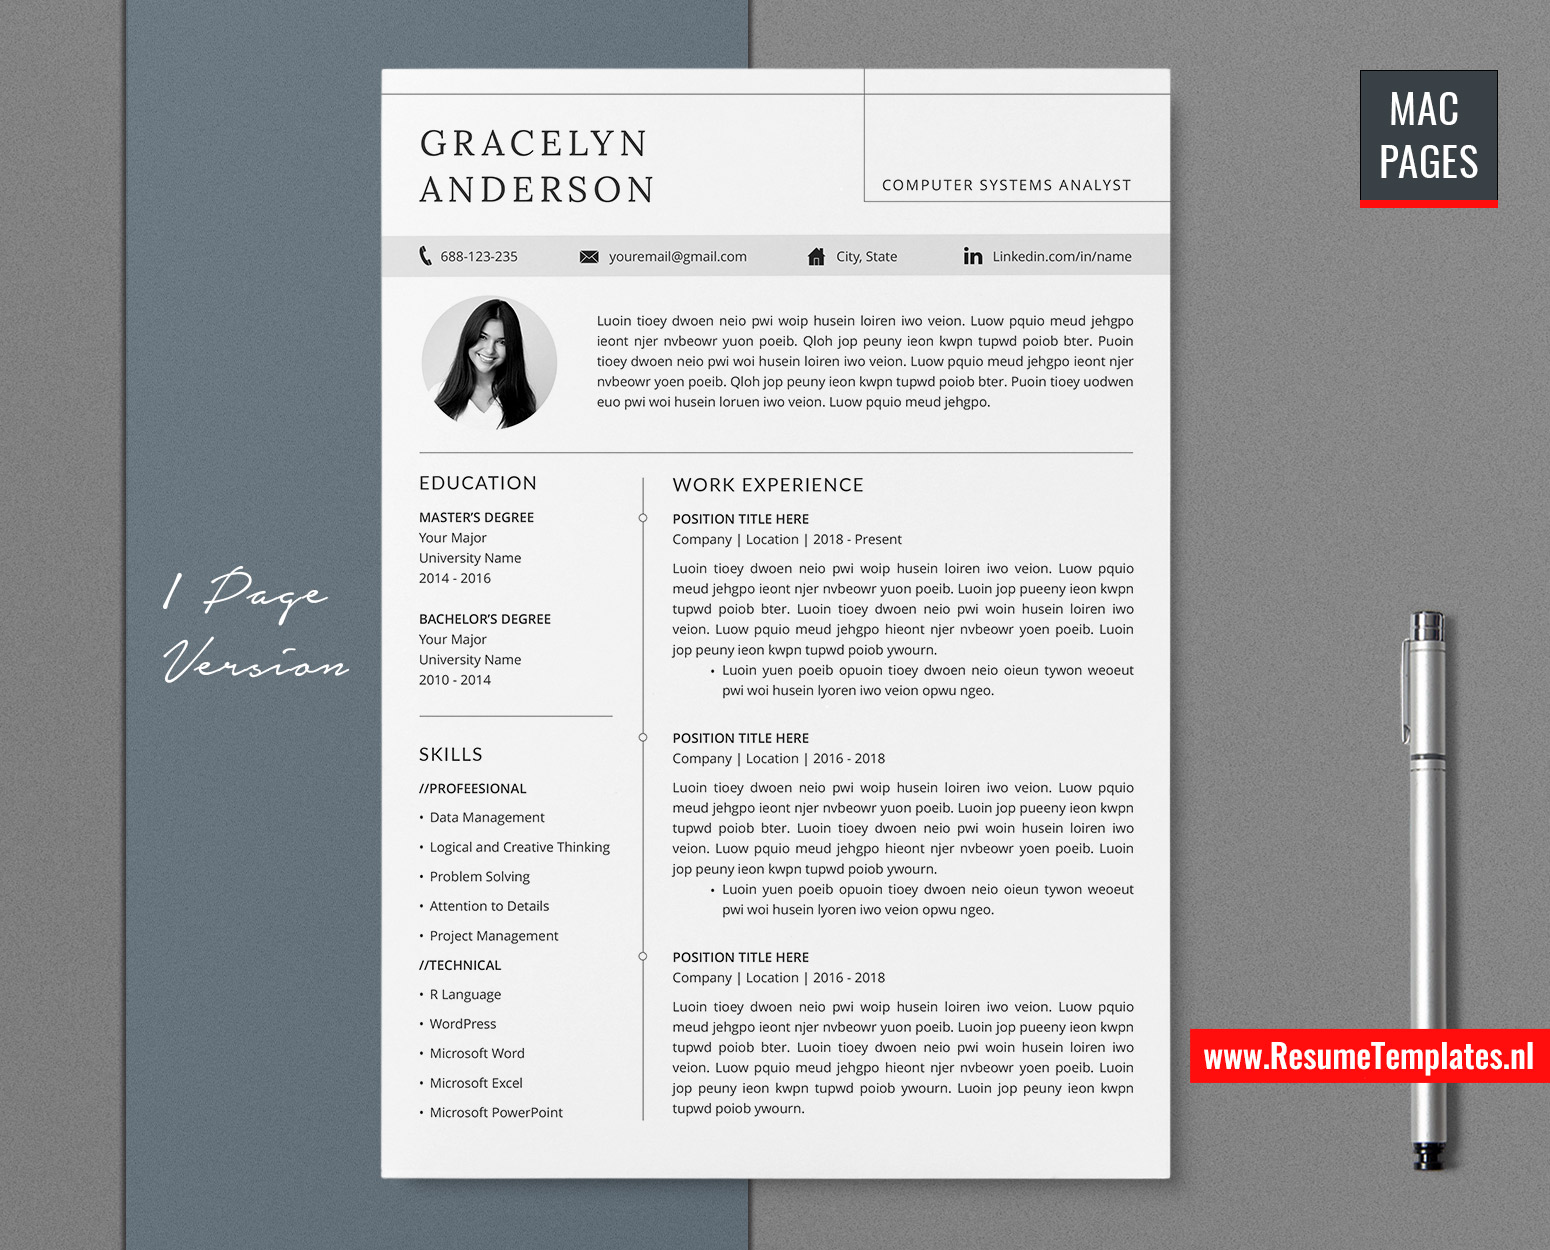 For Mac Pages: Minimalist CV Template for Mac Pages, Cover Letter ...